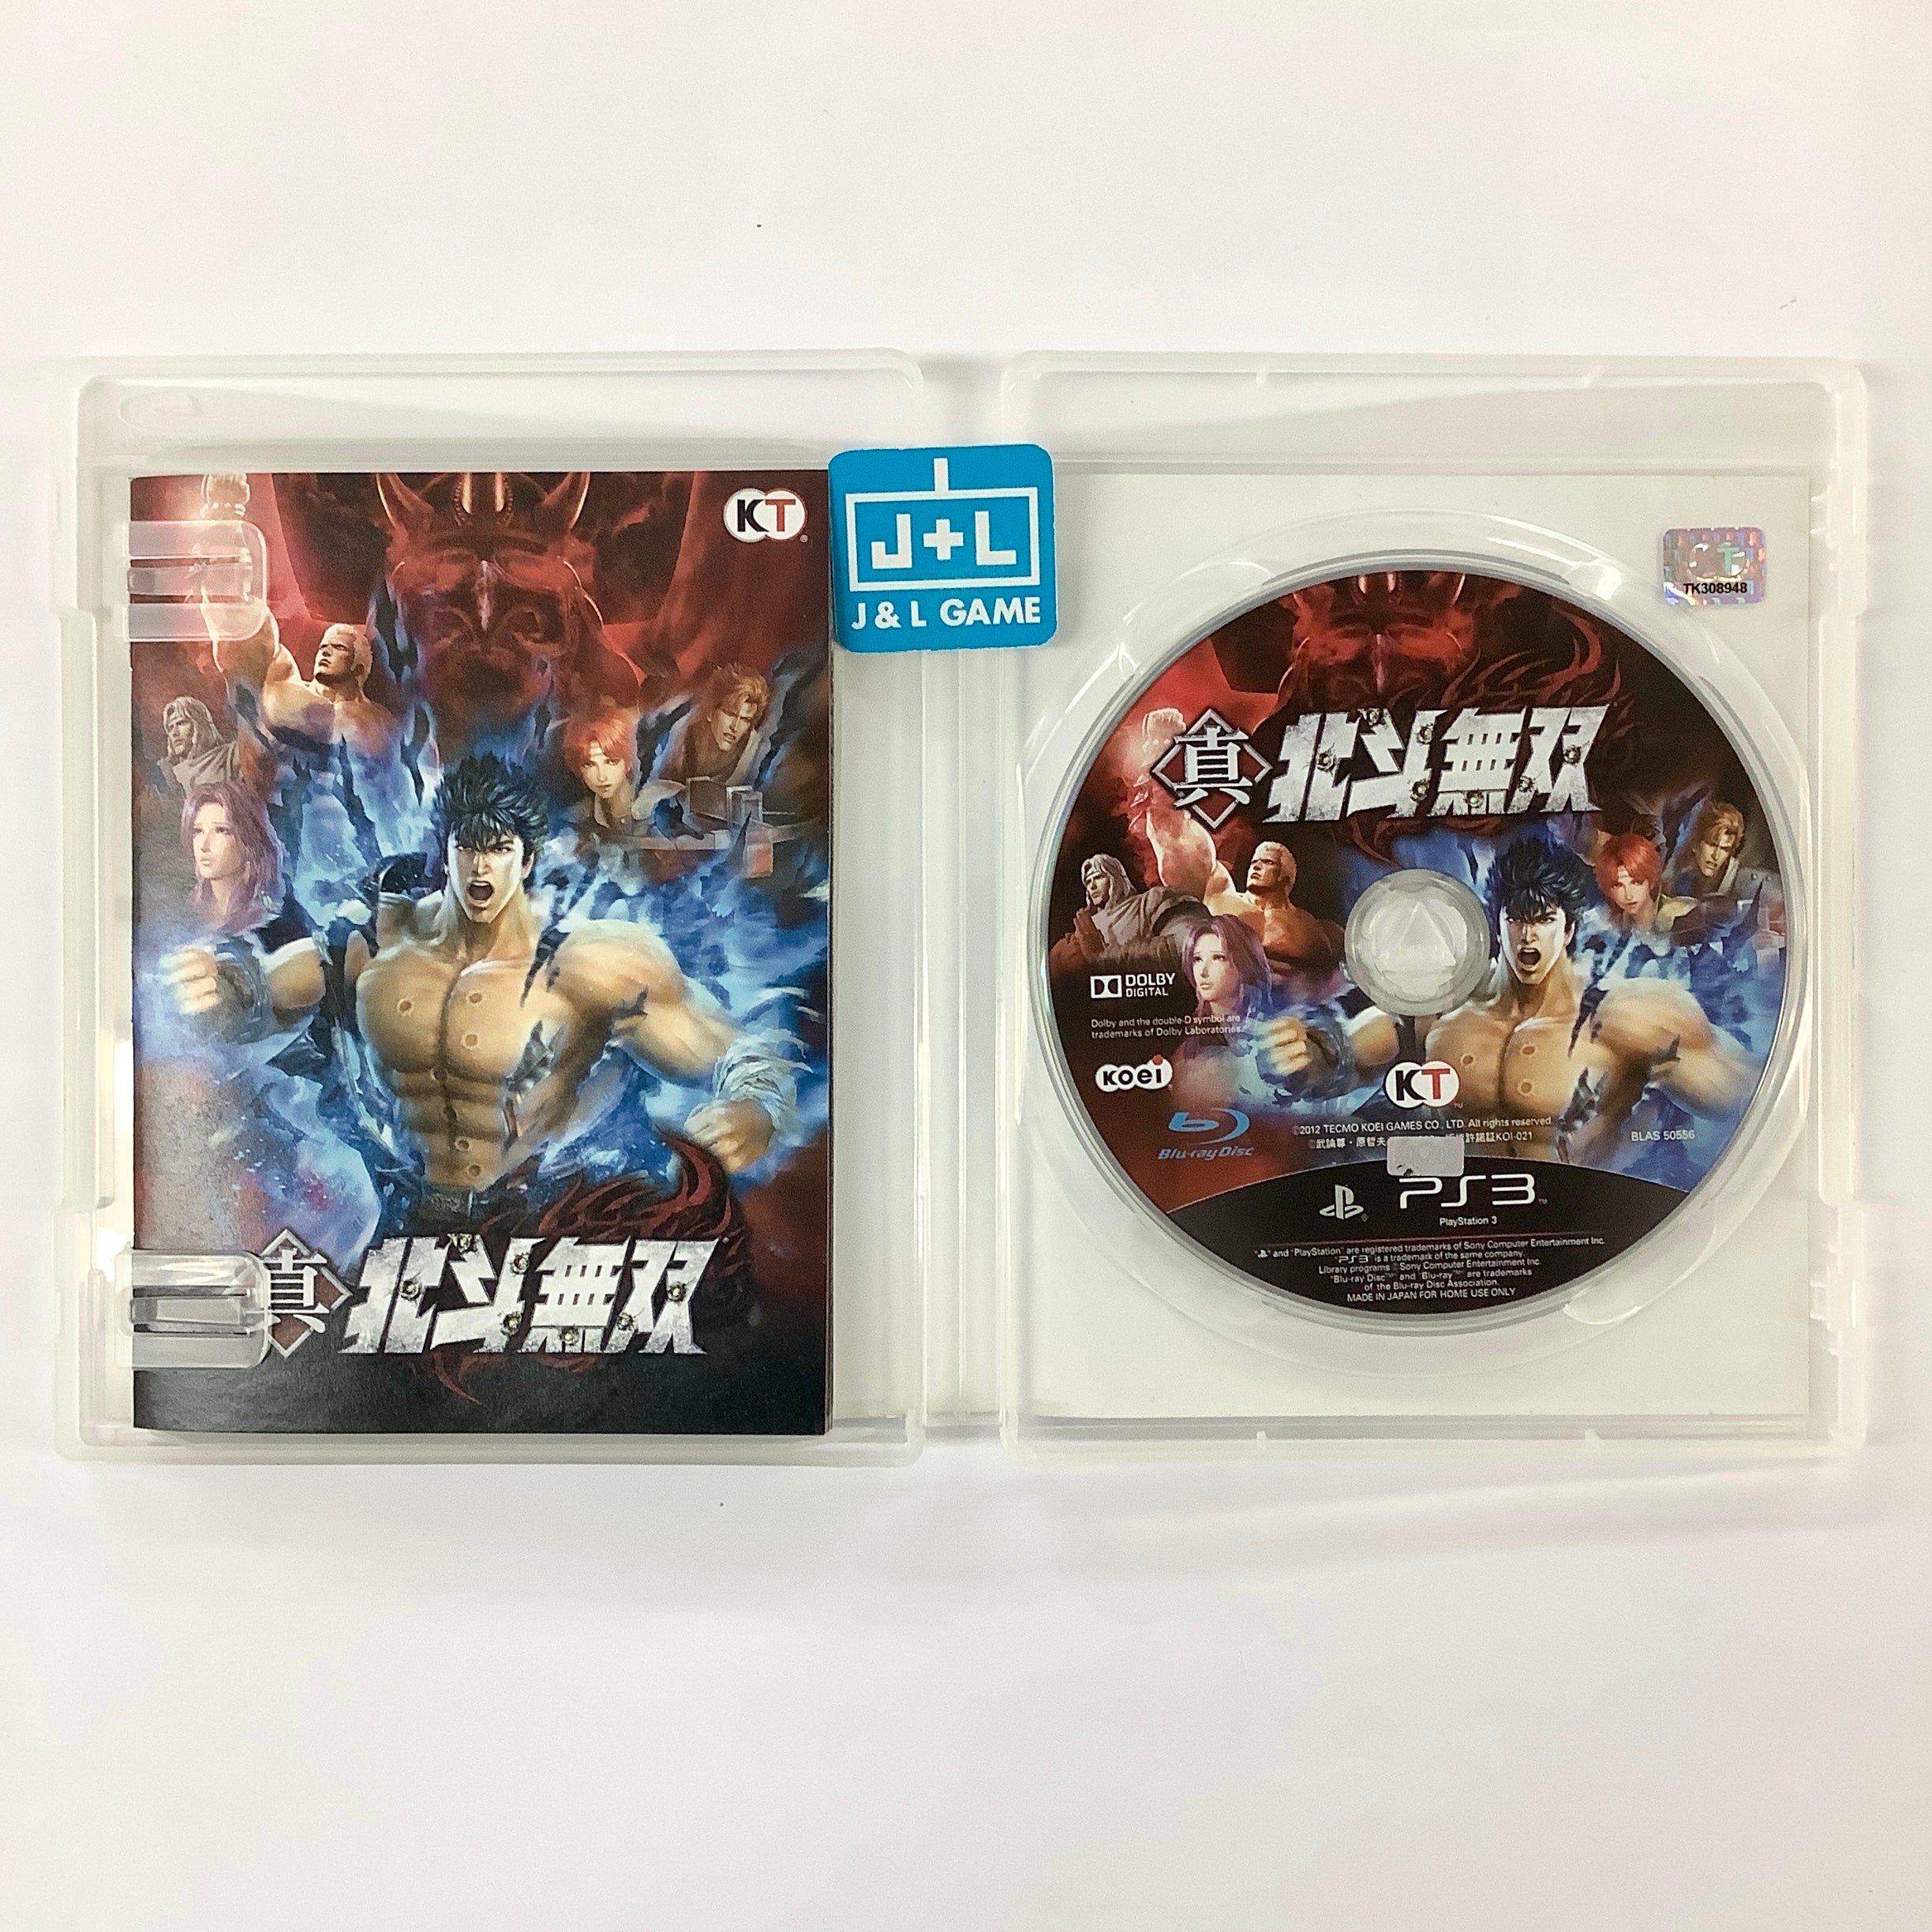 Shin Hokuto Musou - (PS3) PlayStation 3 [Pre-Owned] (Asia Import) Video Games Koei   